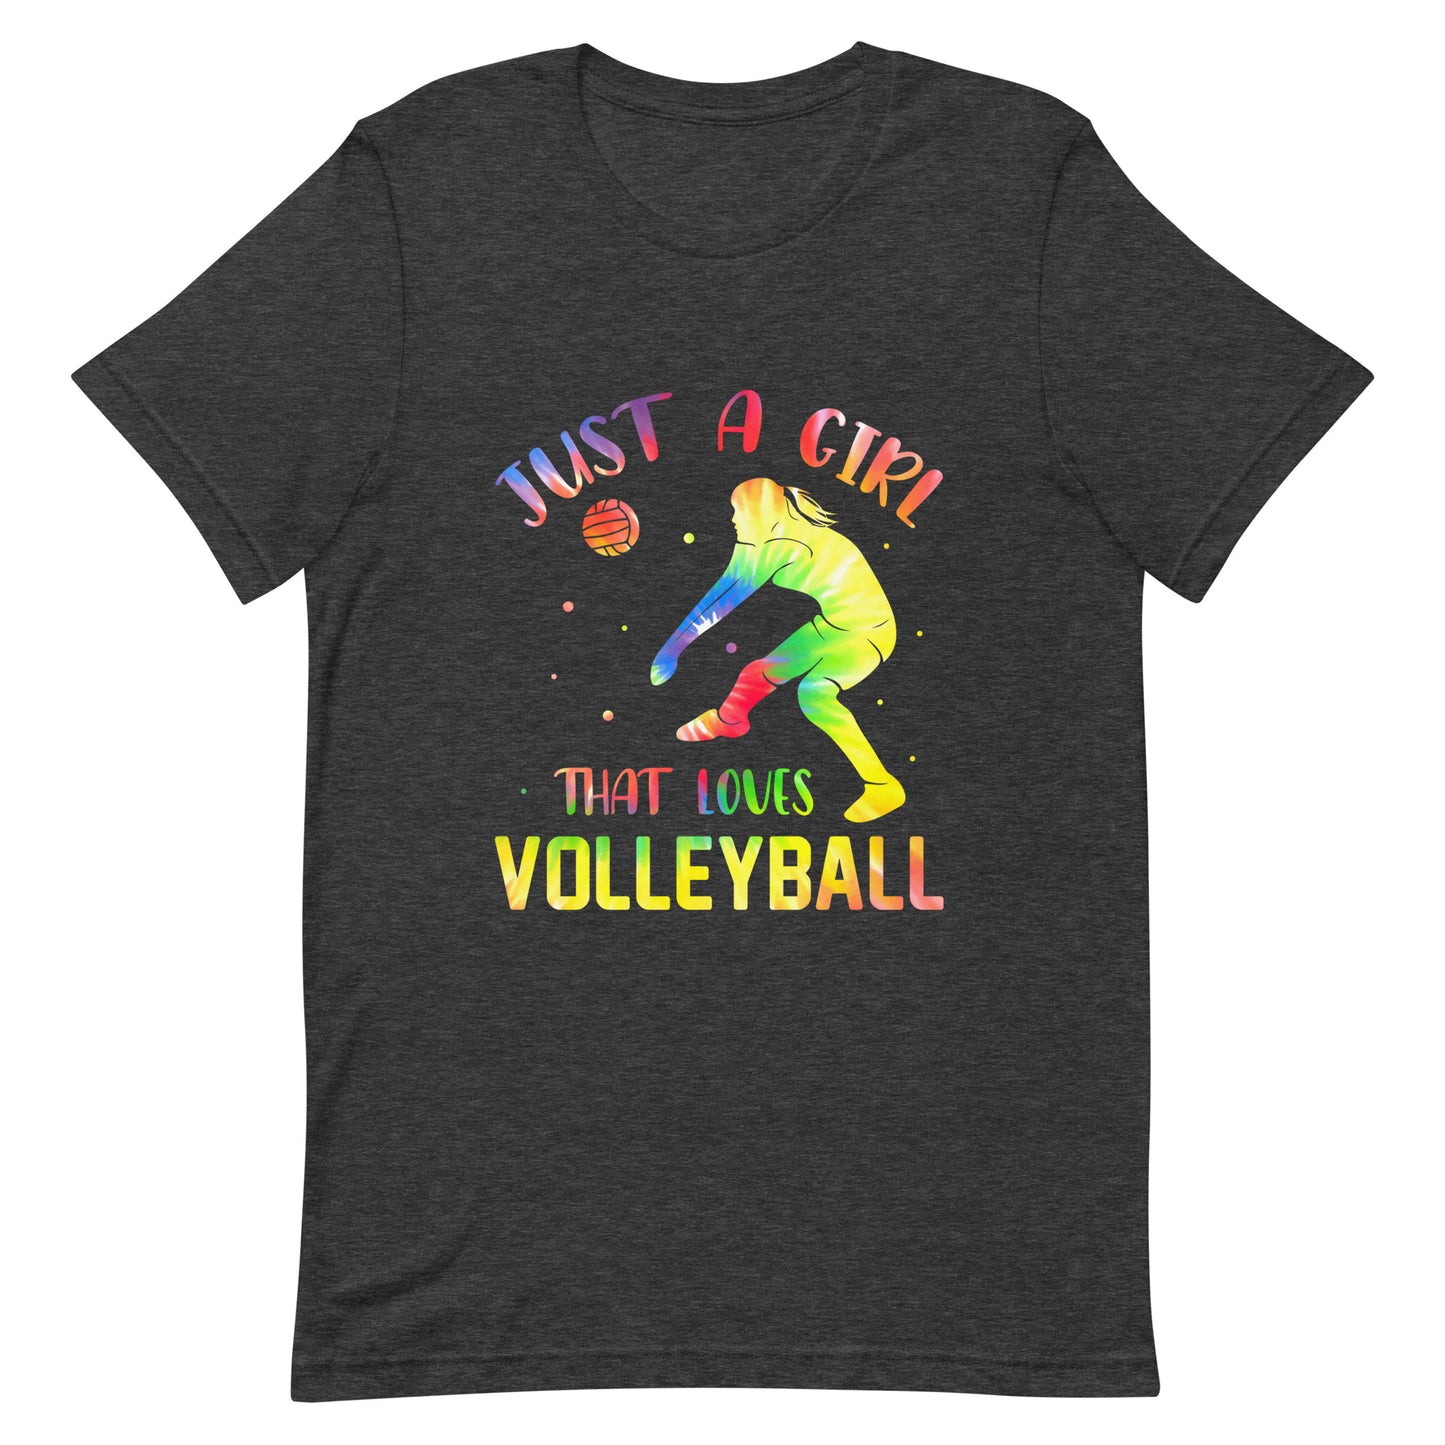 Just A Girl That Loves Volleyball Adult Unisex t-shirt